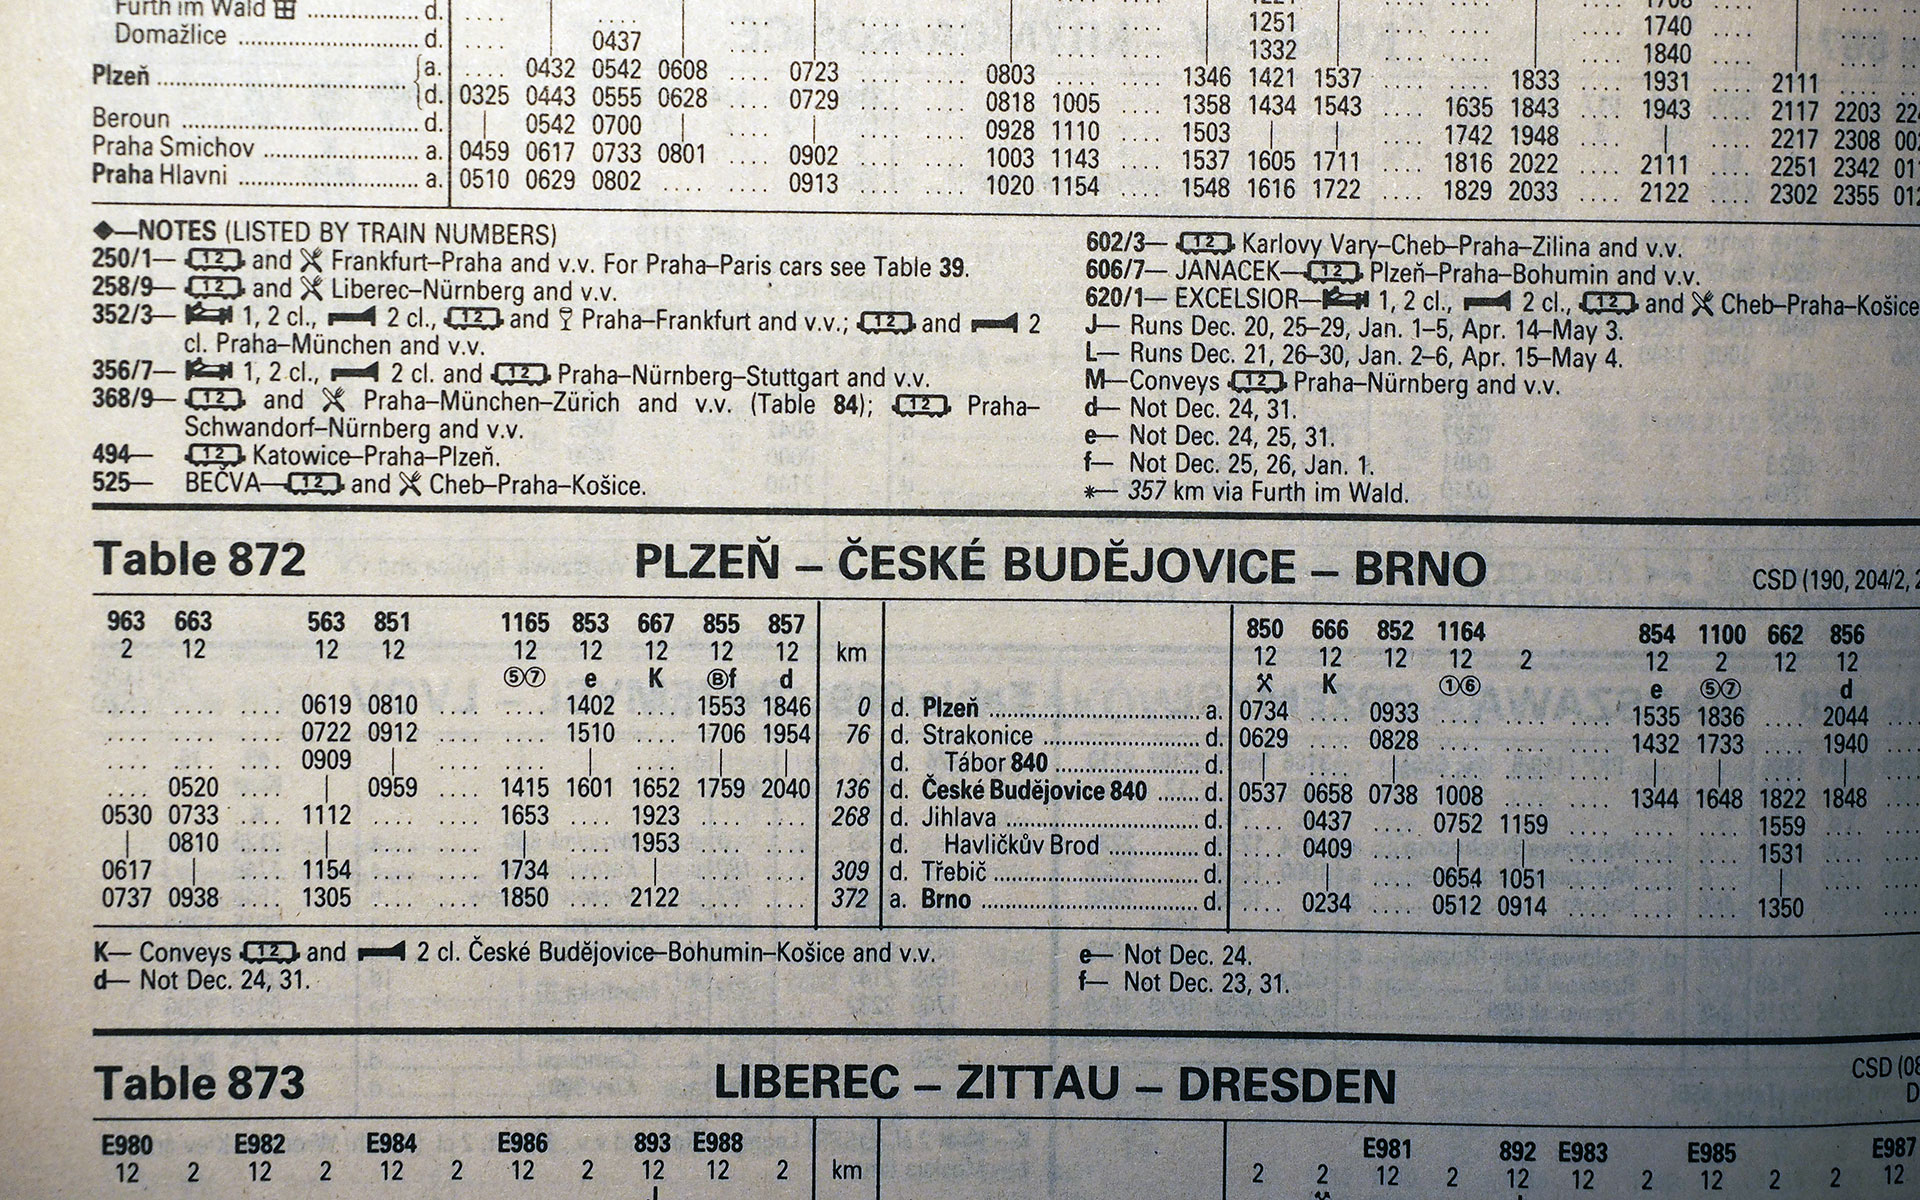 Old timetables are often discarded, but those which are archived in libraries preserve elements of social history and transport history of importance to future generations. Our image shows an extract from a 1991 copy of the Thomas Cook European Rail Timetable.